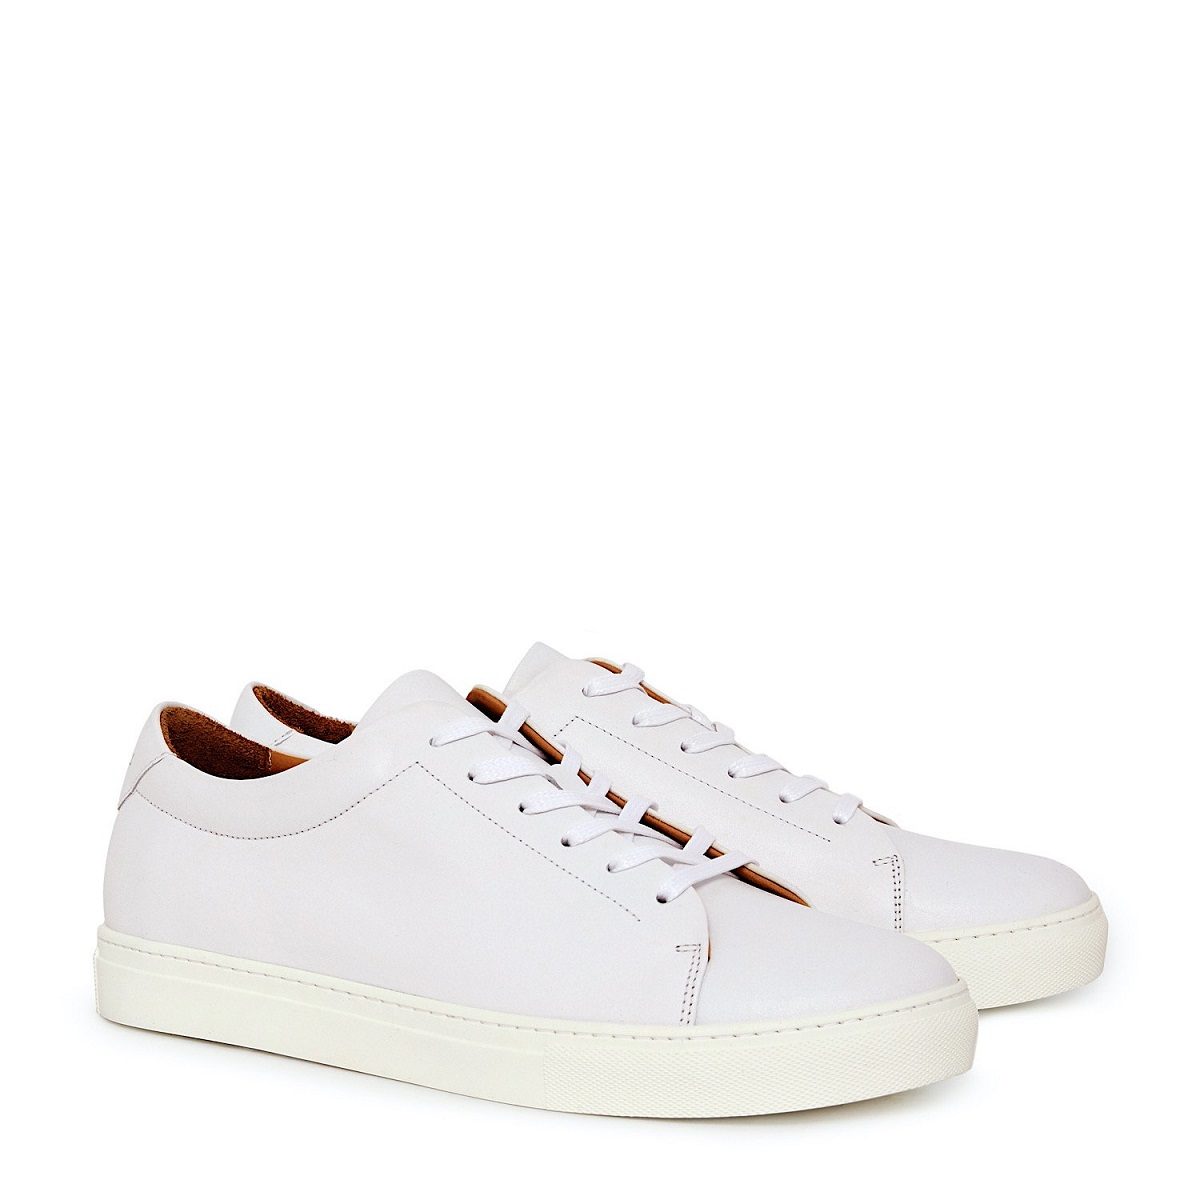 Trust RM Williams to present some of the best white sneakers one could buy.